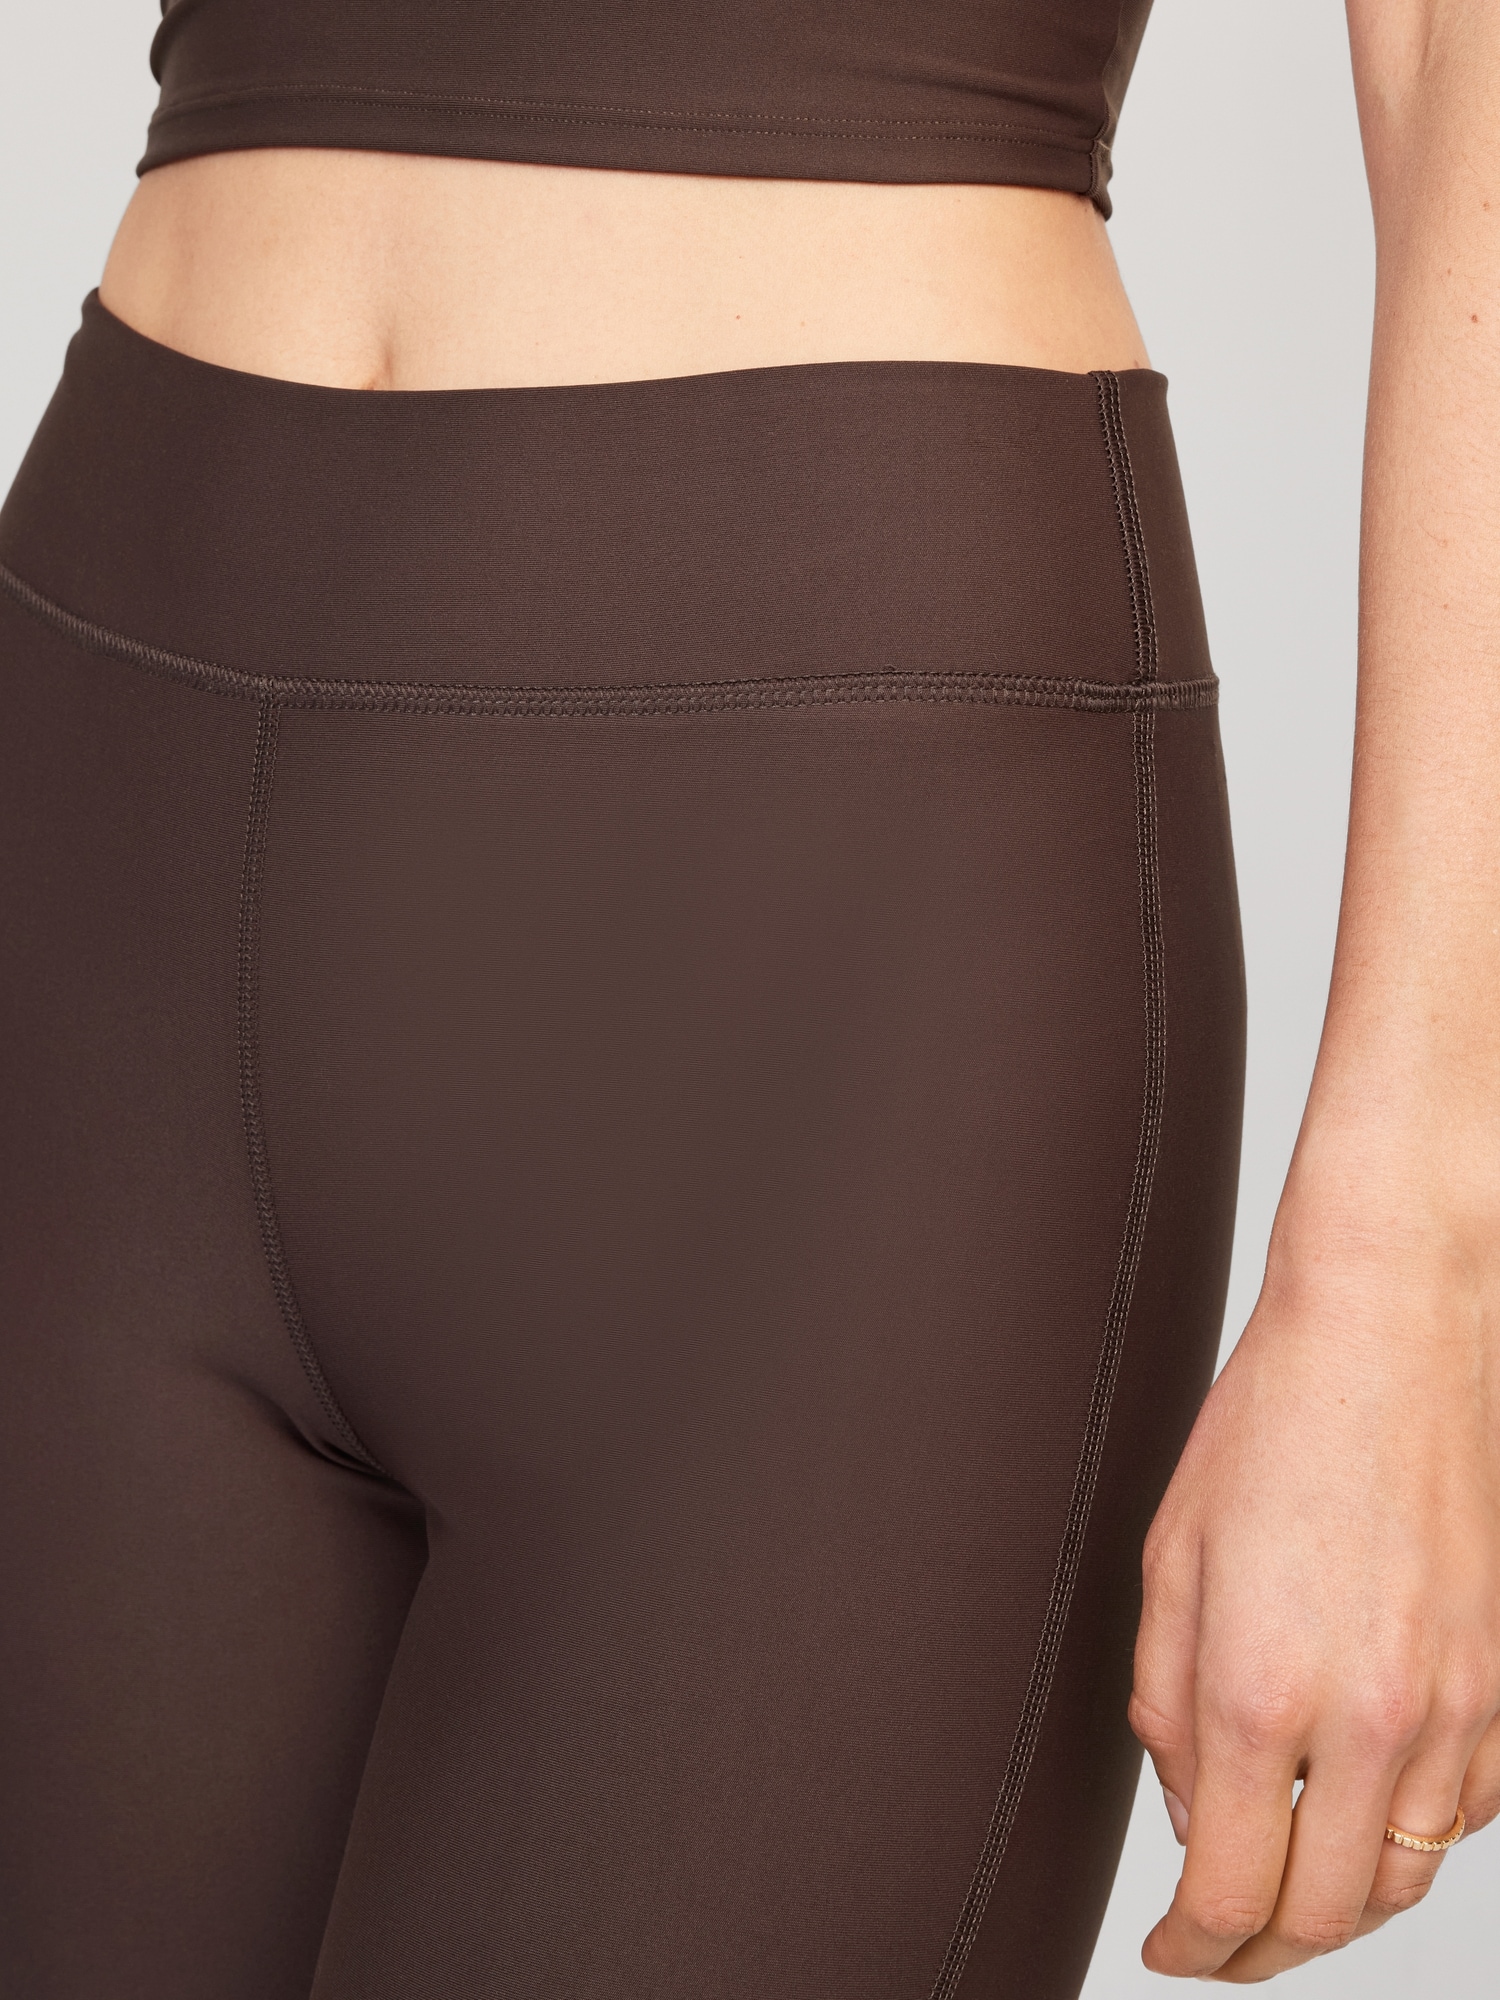 Slide View: 1: Out From Under Cozy Ribbed Legging